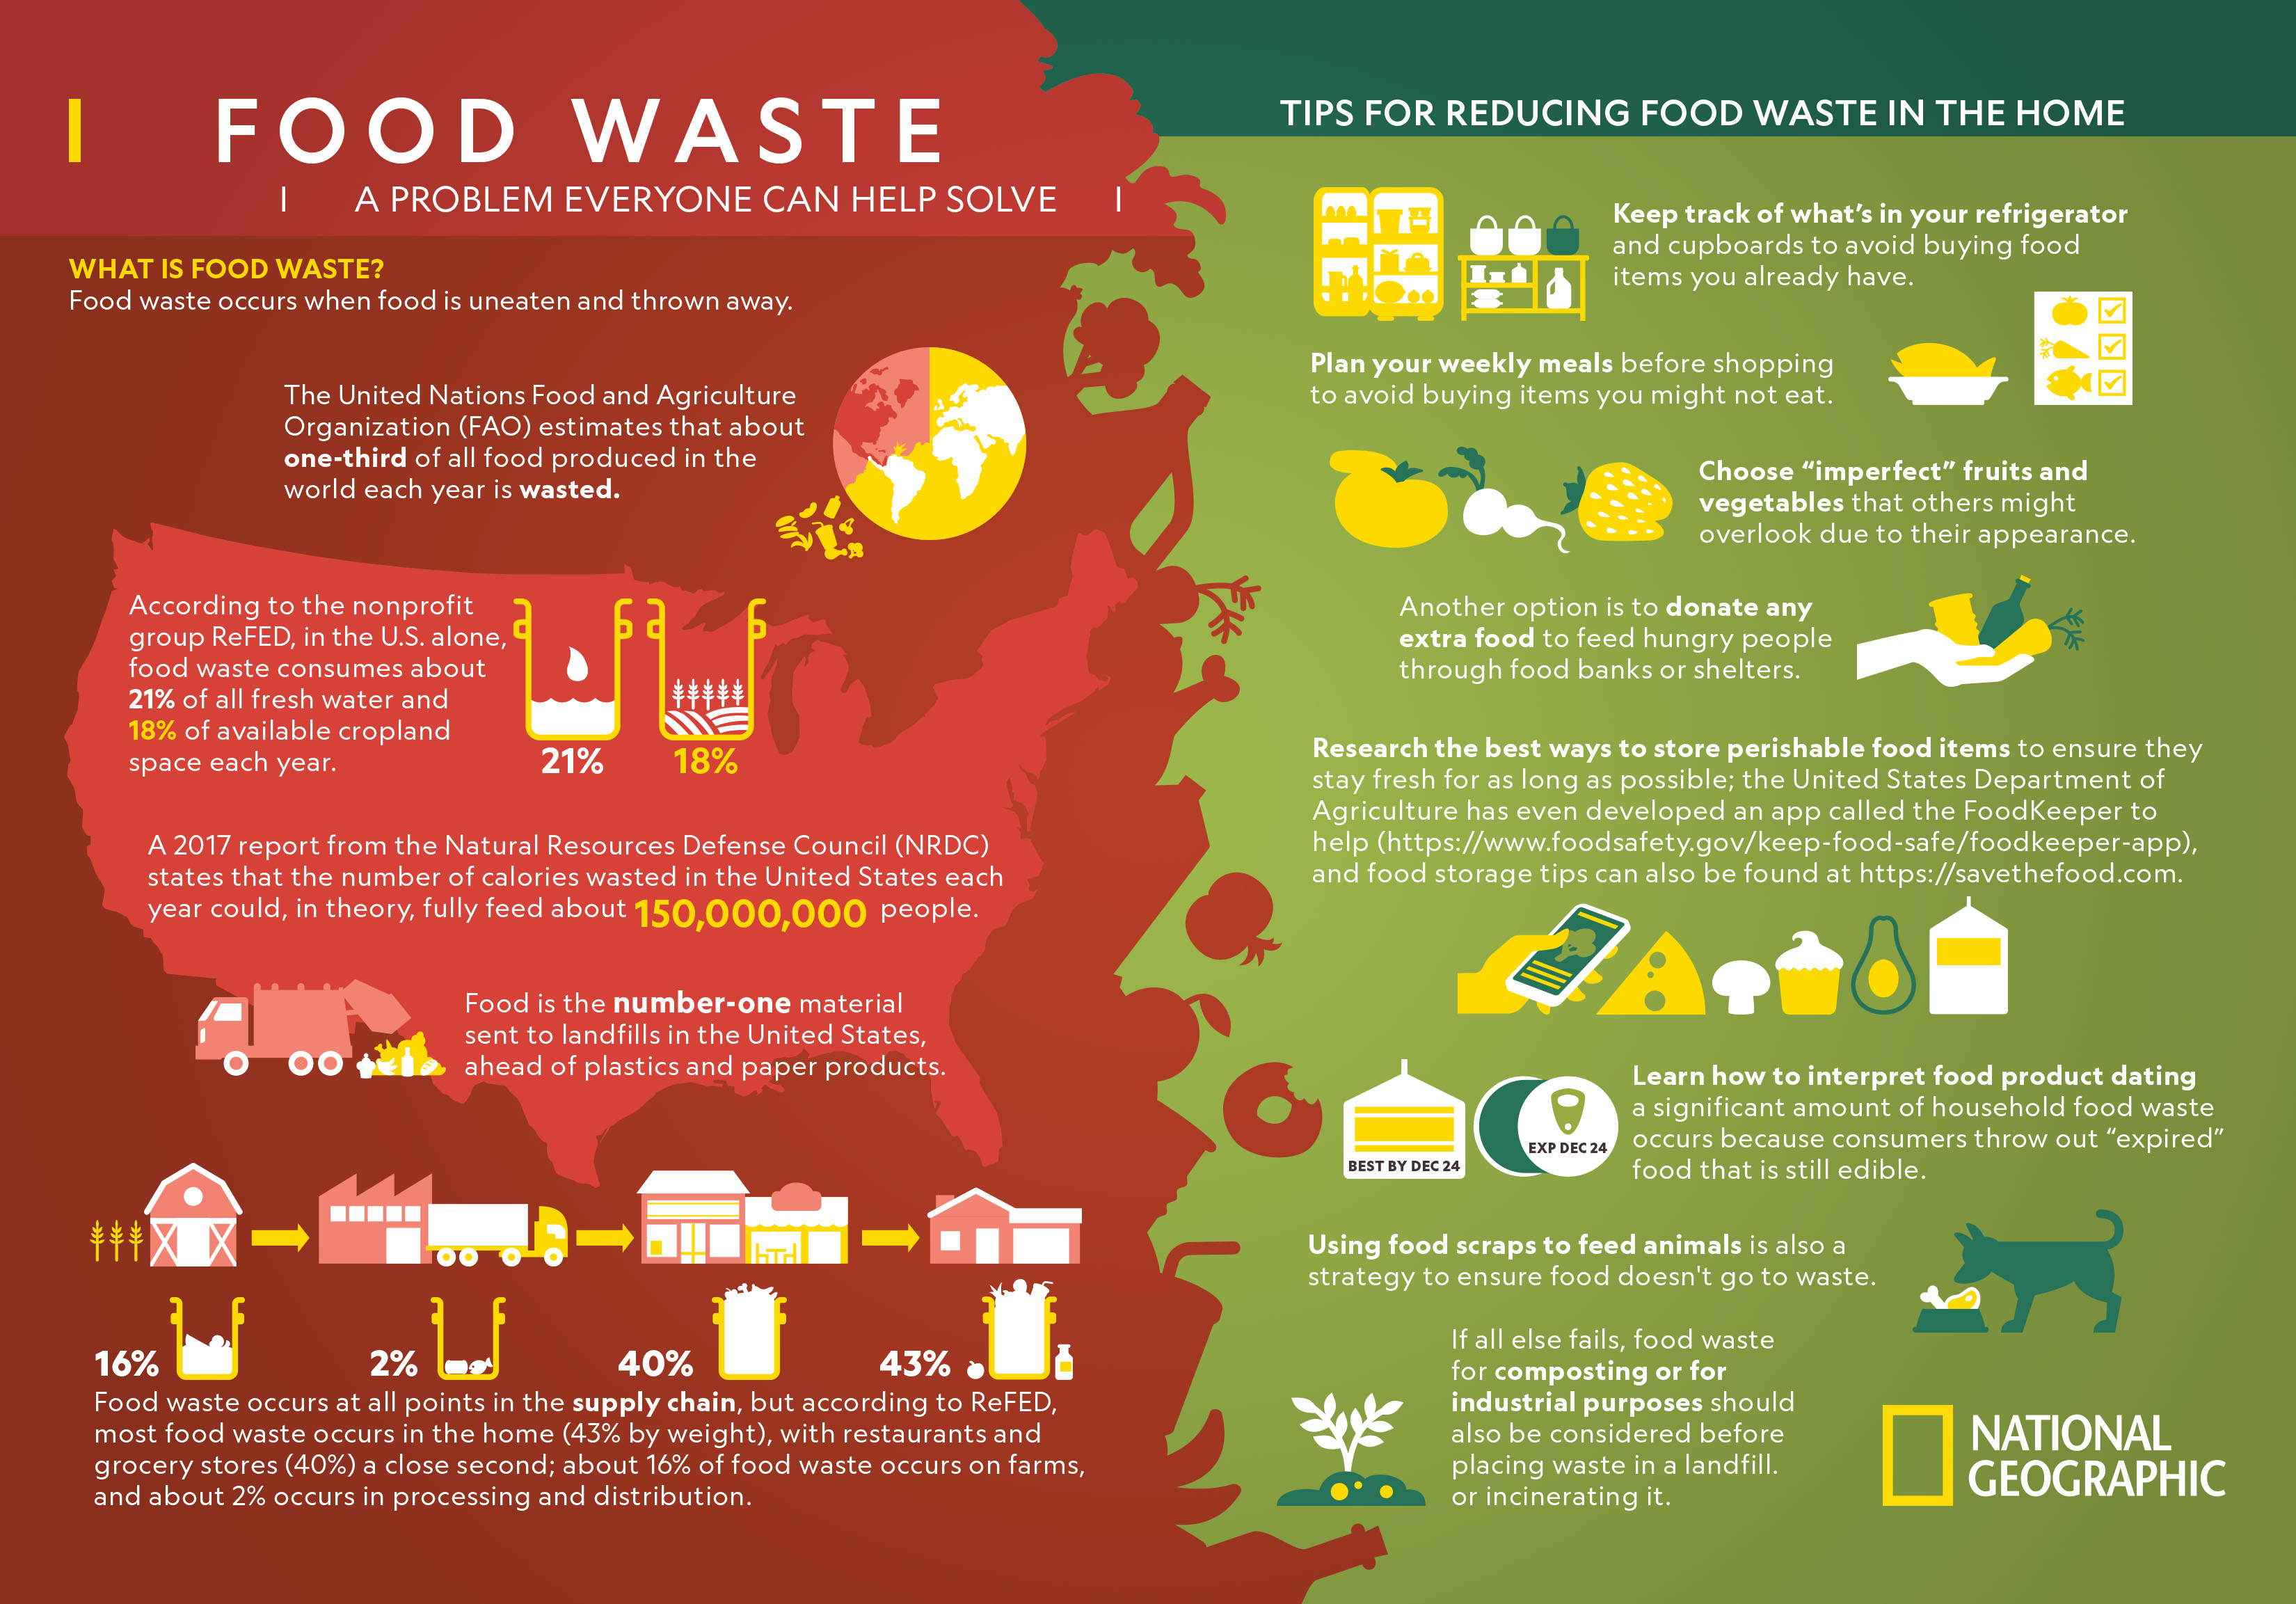 Food Recovery, Sustainability